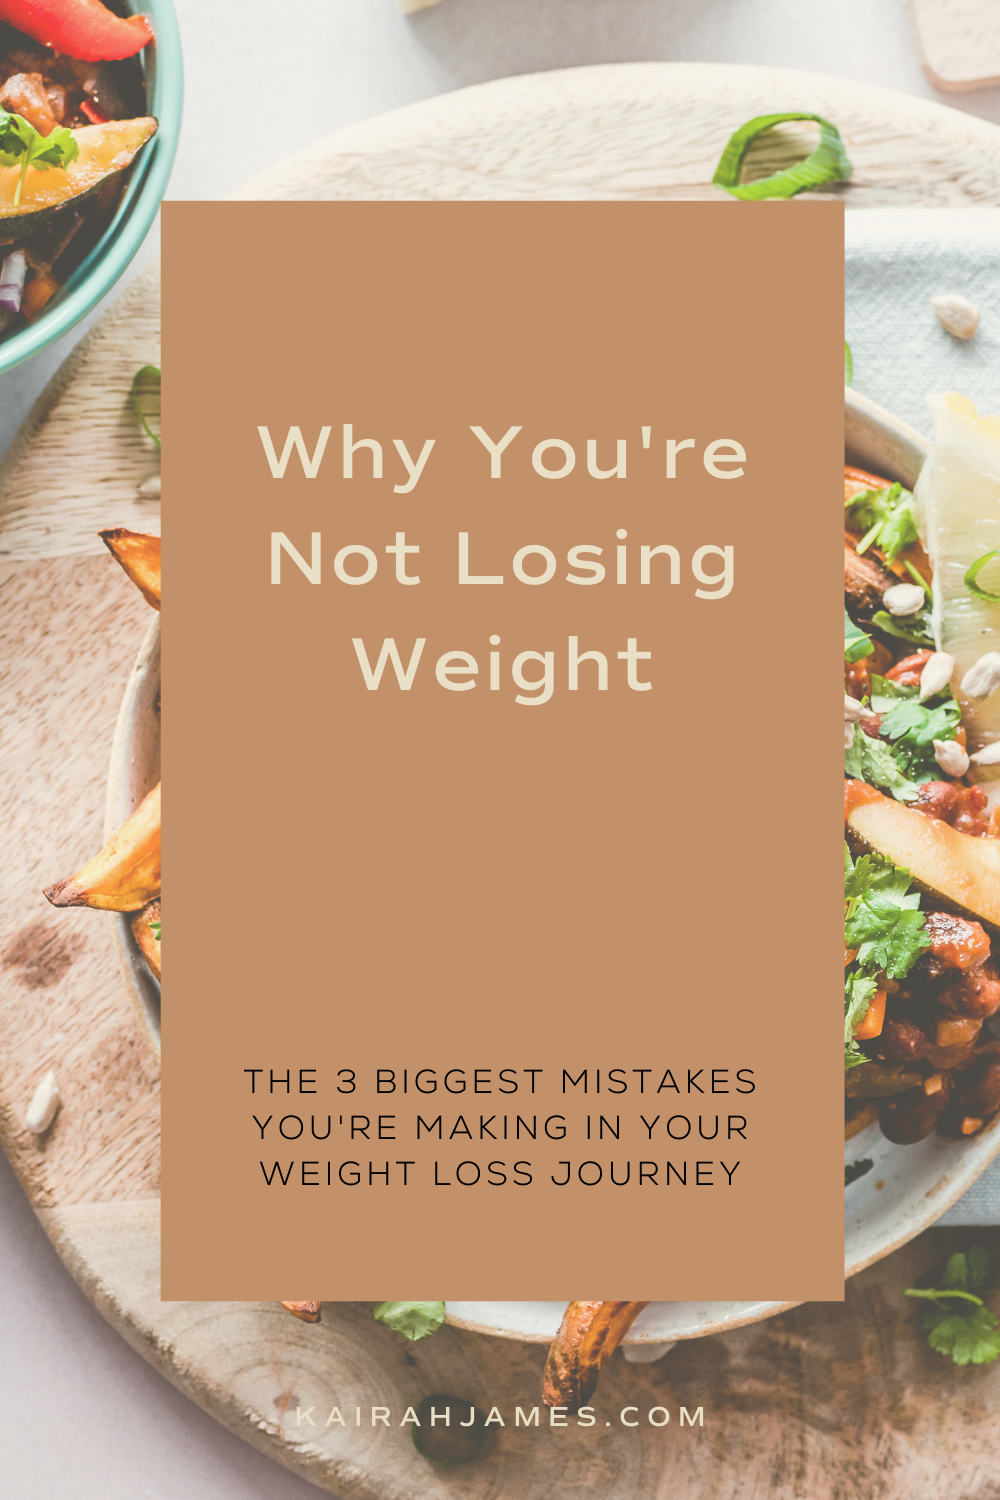 Why You're Not Losing Weight